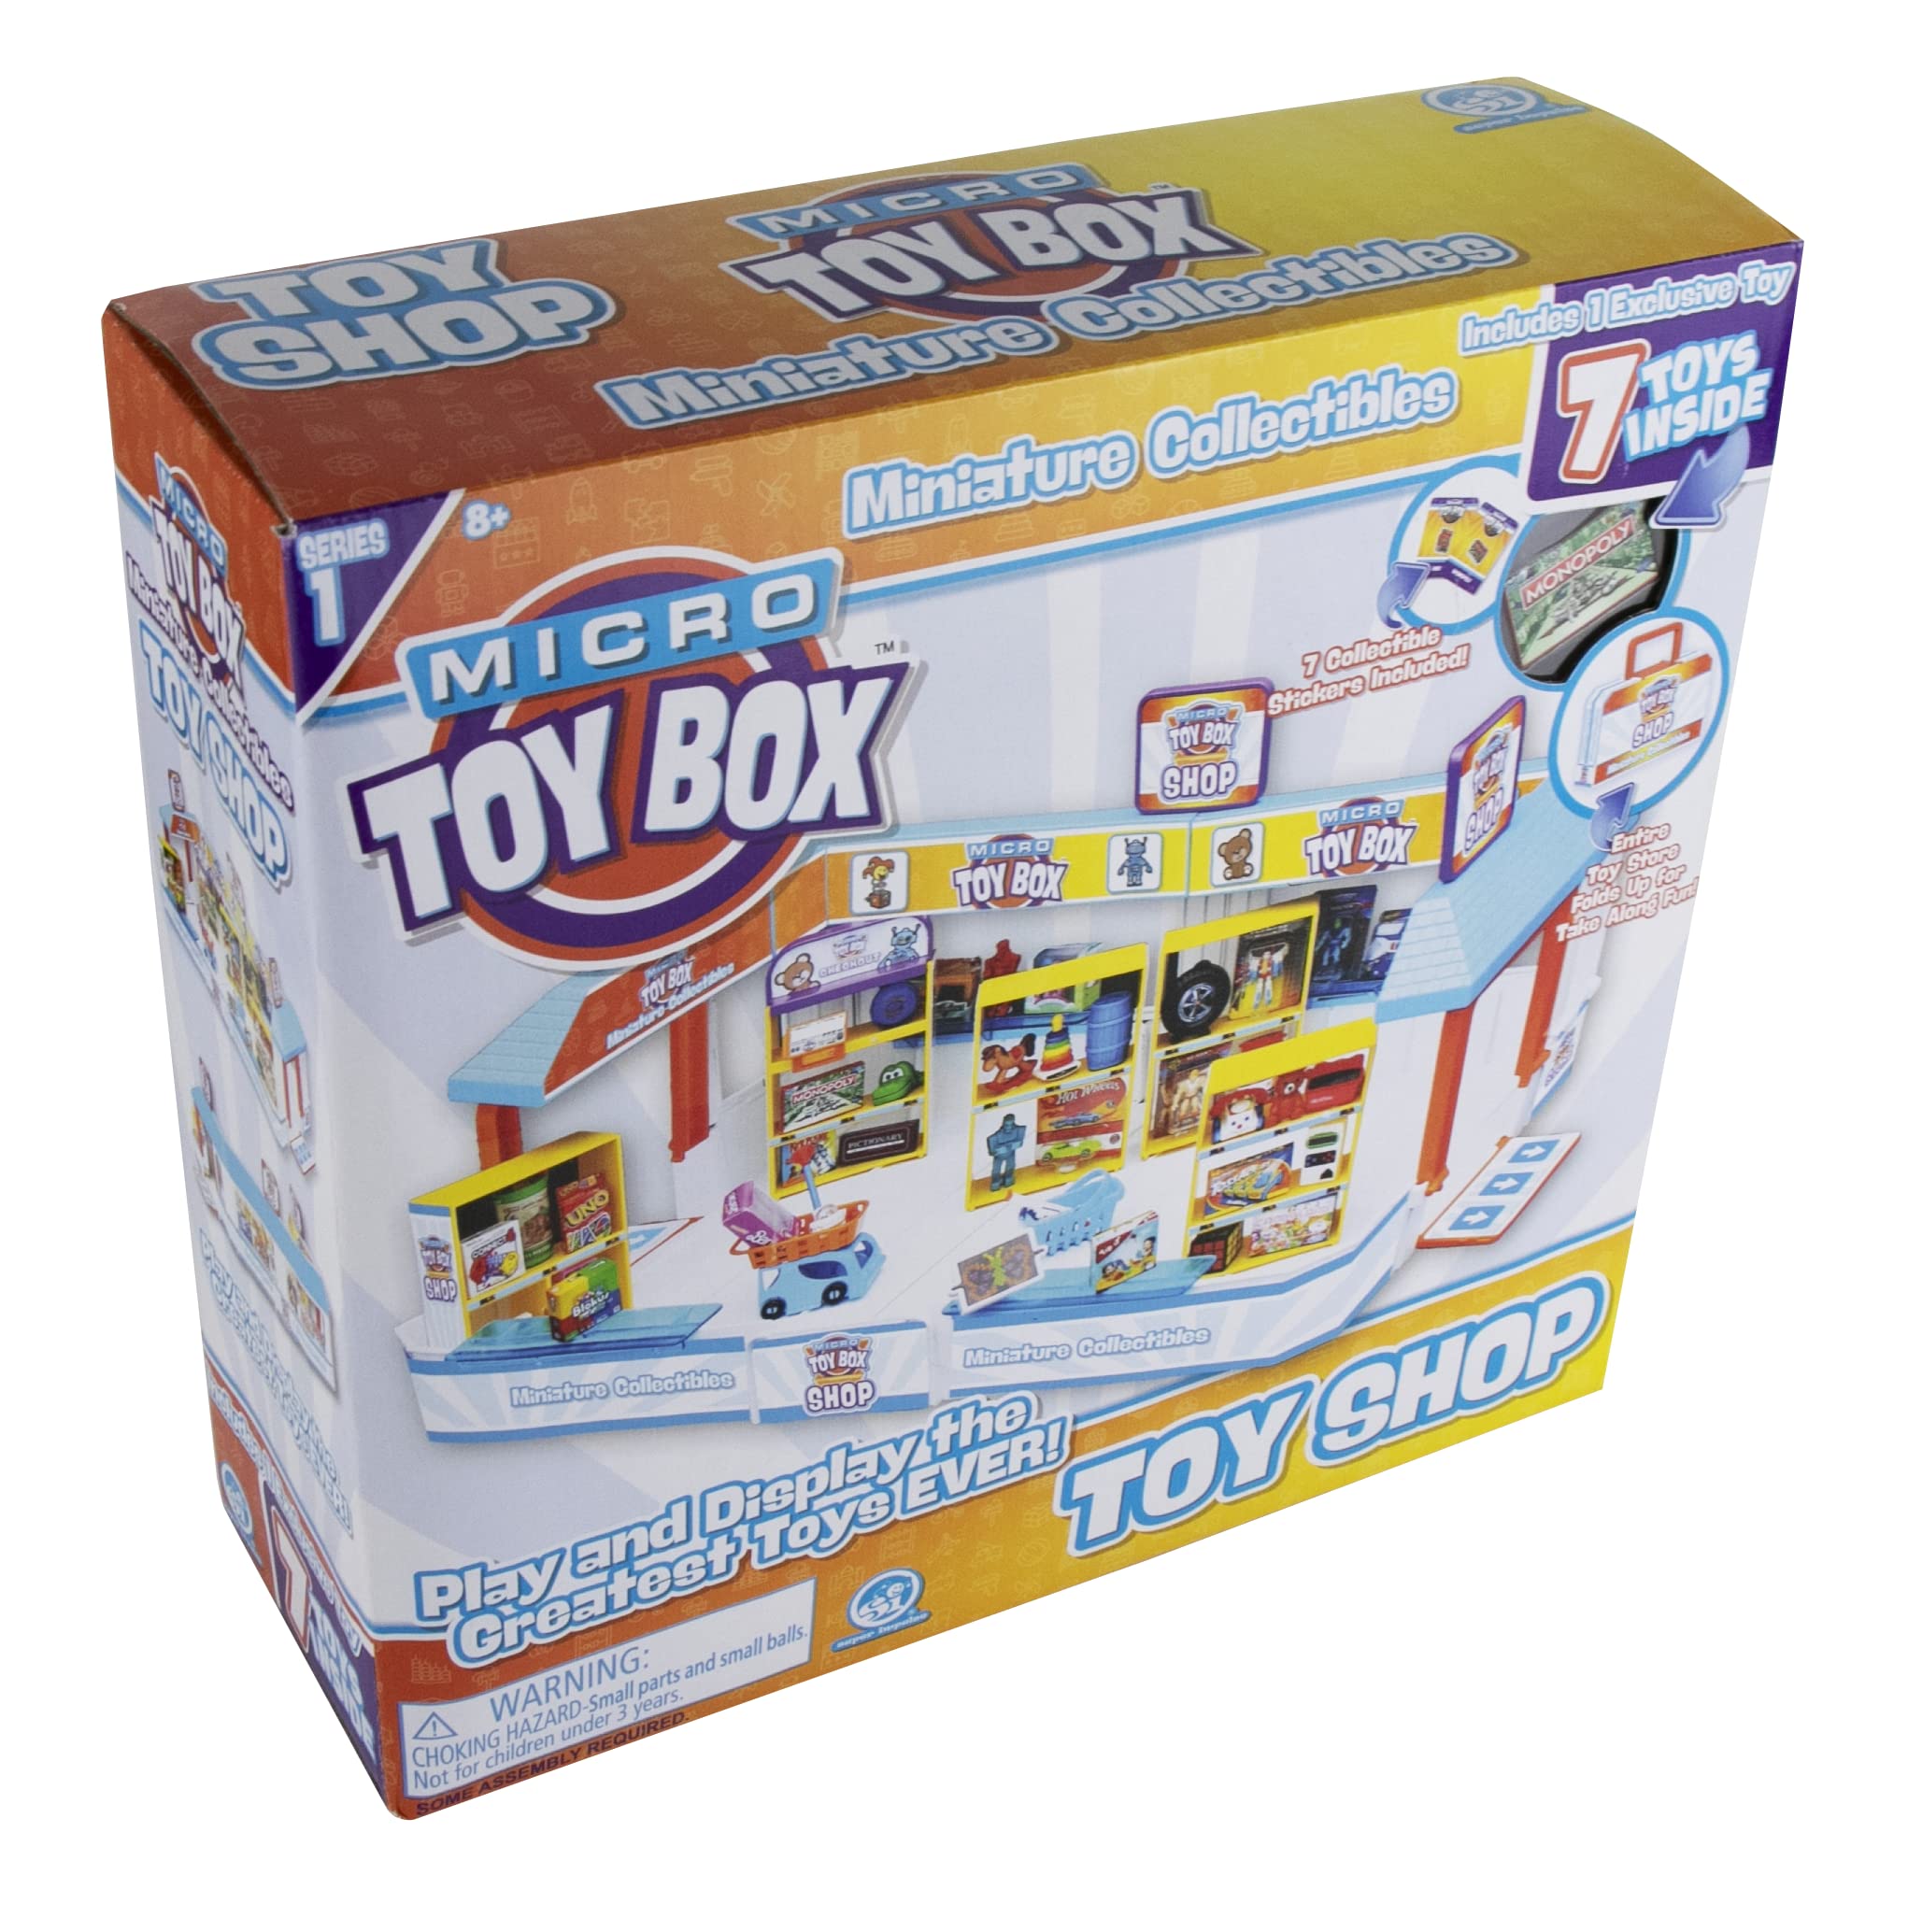 Worlds Smallest Micro Toy Box Store Playset, Multi